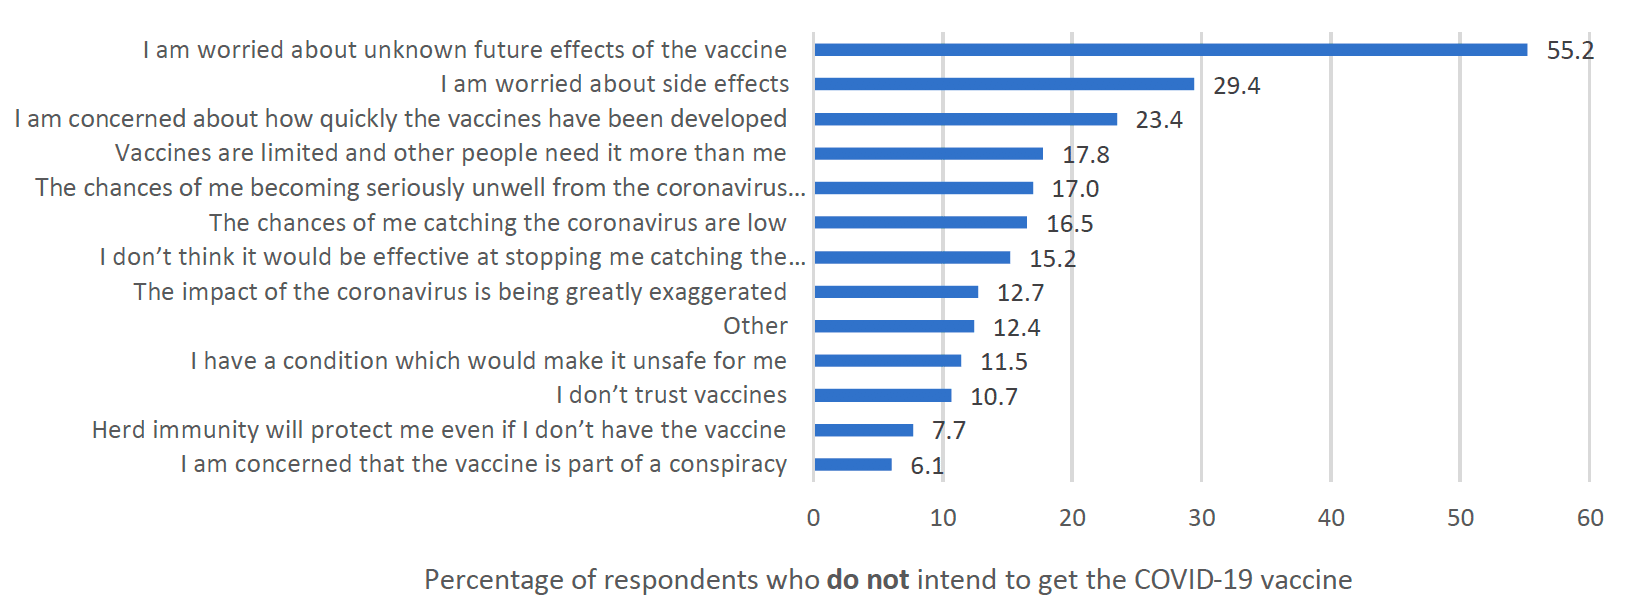 This figure illustrates the reasons for not taking the COVID-19 vaccine for the percentage of respondents who do not intend to get the vaccine. Of these, 55.2% worried about unknown future effects of the vaccine and 29.4% reported being worried about side effects. A further 23.4% was concerned about how quickly the vaccines were developed and 17.8% agreed that vaccines are limited and other people need them more than they. Sixteen-point-five-percent perceived the chances of becoming seriously unwell from the coronavirus as low and 15.2% did not think the vaccine would be effective at stopping them from catching the coronavirus. In addition, 12.7% believed that the impact of the coronavirus is greatly being exaggerated and 12.4% indicated ‘other’ reasons. Eleven-point-five-percent reported that they have a condition which would make it unsafe to be vaccinated and 10.7% reported not trusting vaccines. Seven-point-seven-percent believed that herd immunity will protect them if they don’t have the vaccine and 6.1% reported being concerned that the vaccine is part of a conspiracy. 